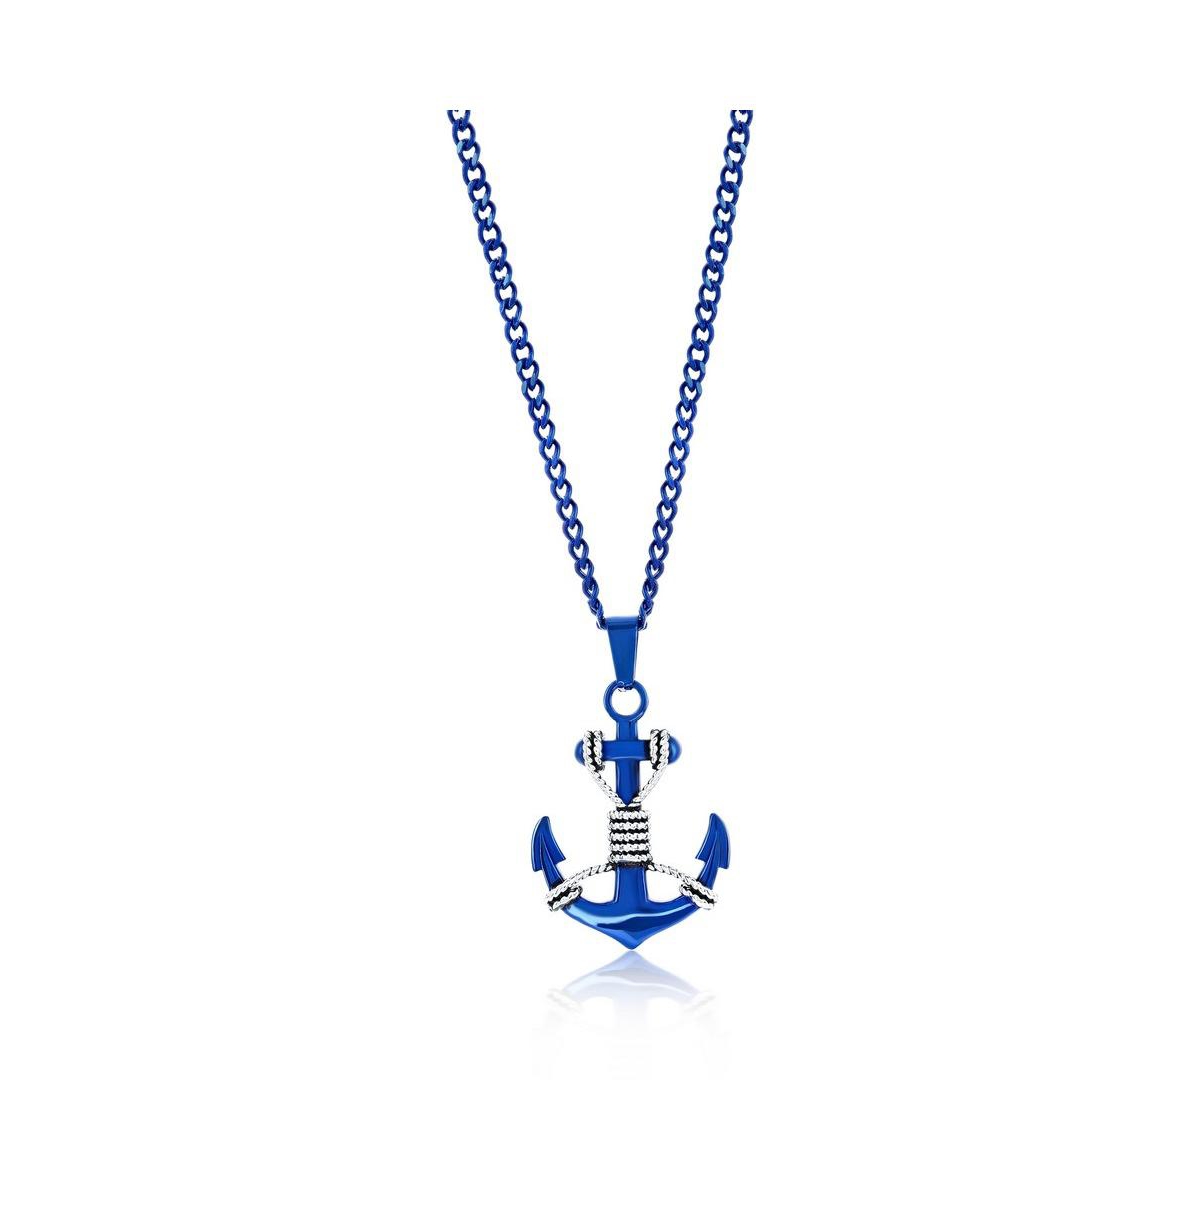 Stainless Steel Anchor Necklace - Silver